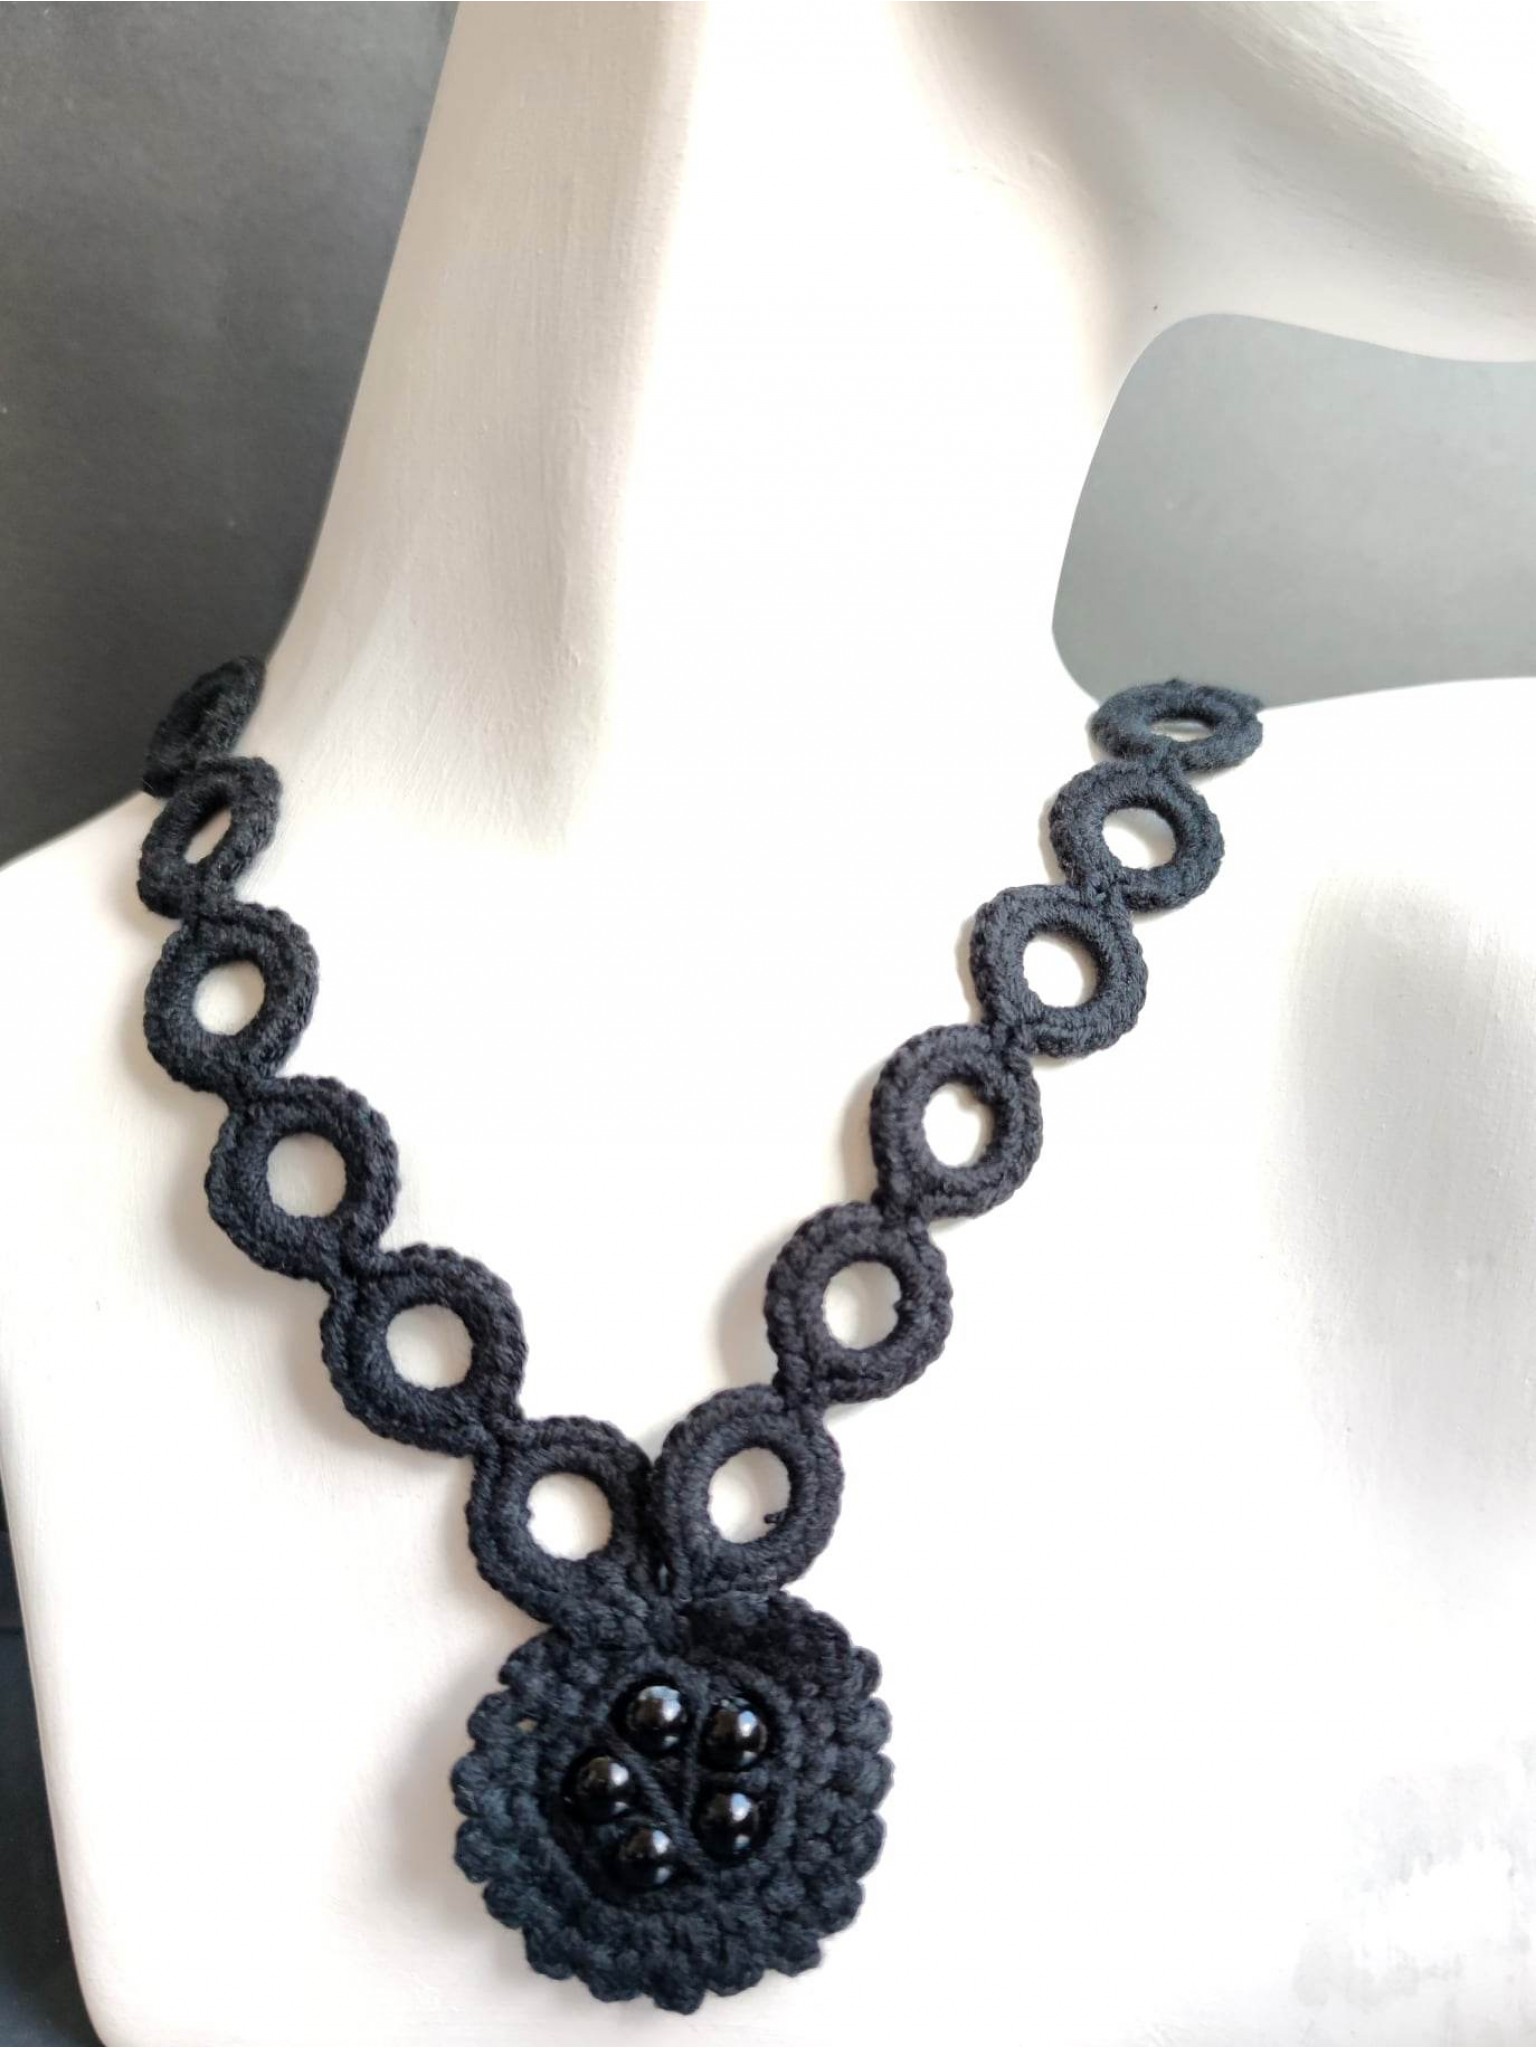 Hand-made knitted necklace for magical rituals by Mary-Ella Todorof